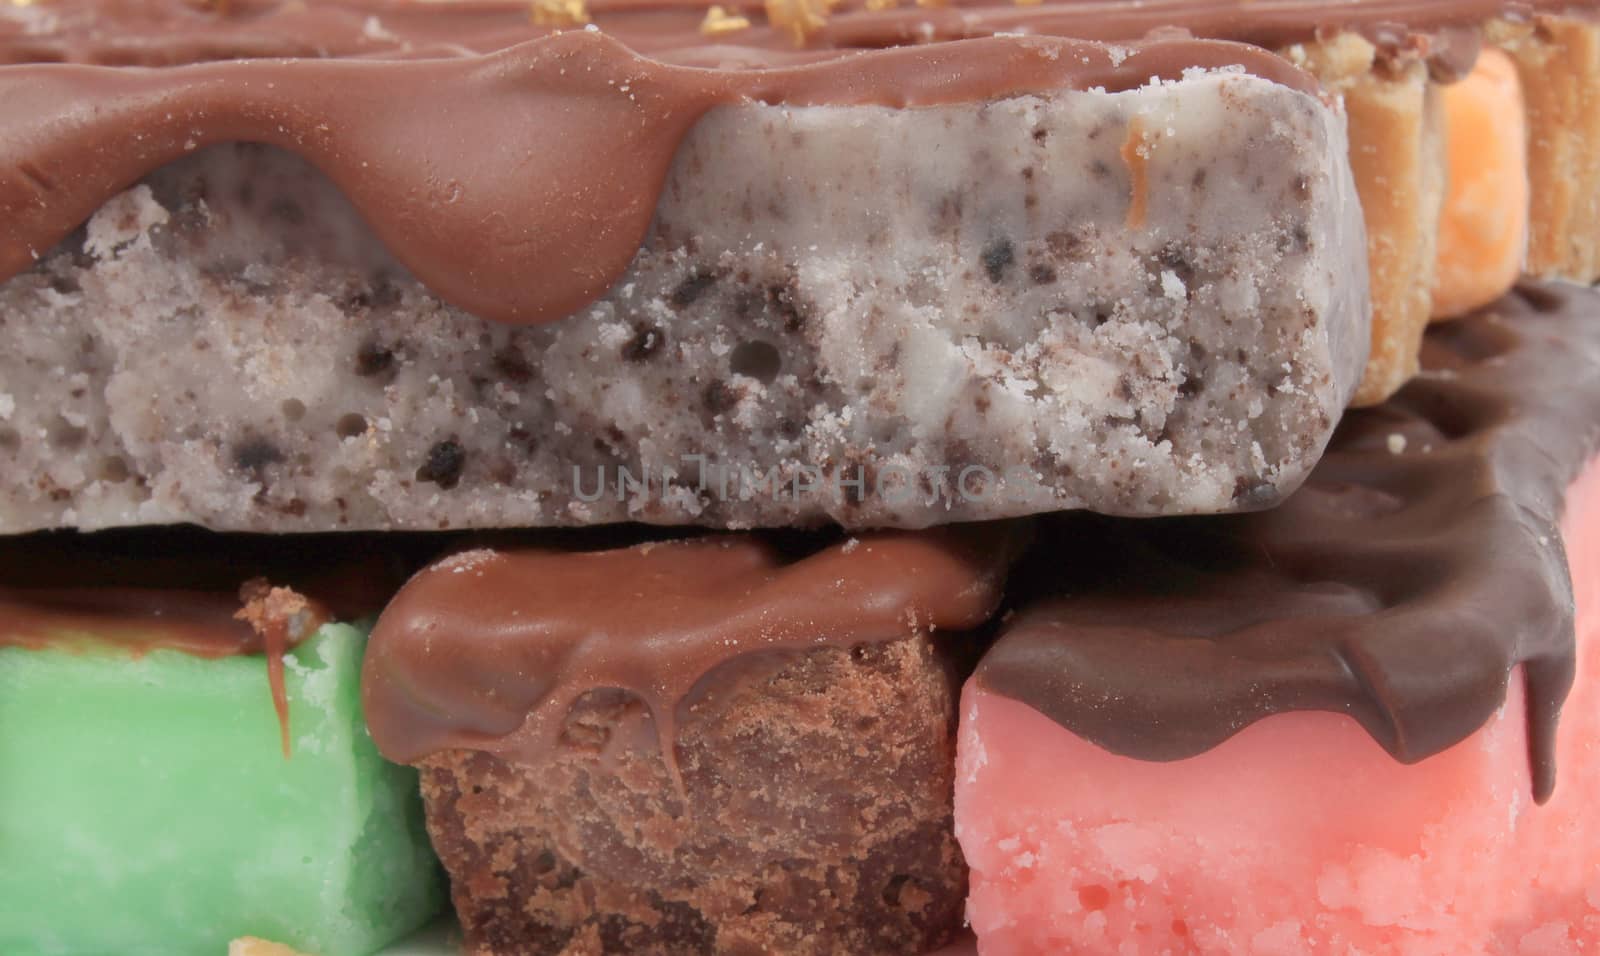 Close up of fudge bar pile in different colors and flavors covered in chocolate